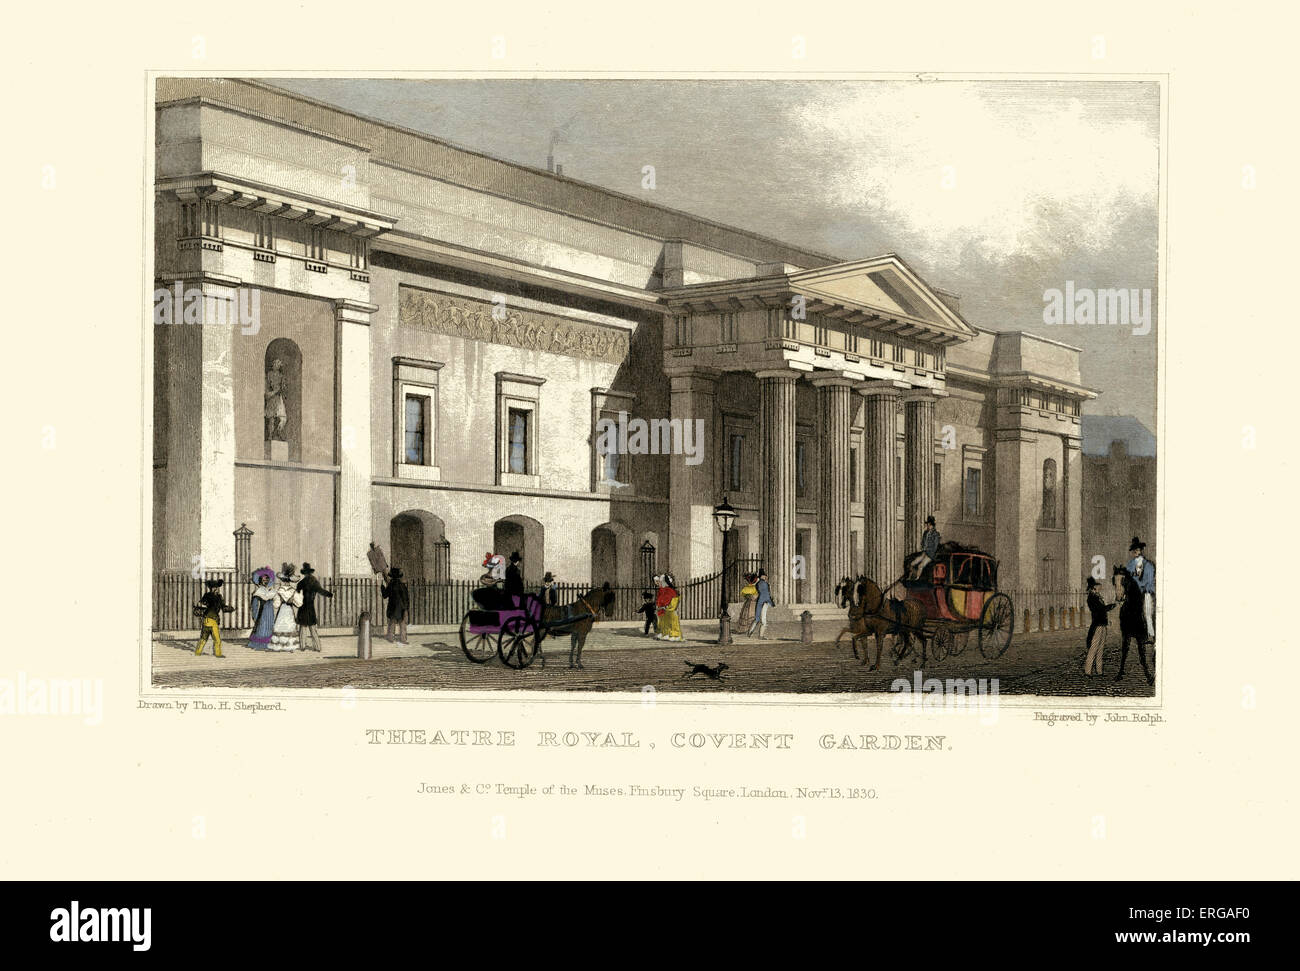 London Views: Theatre Royal, Covent Garden. Drawn by Thomas Hosmer Shepherd 1792 – 1864. Engraved byJohn Rolph. Published 13th November, 1830. Hand coloured Stock Photo